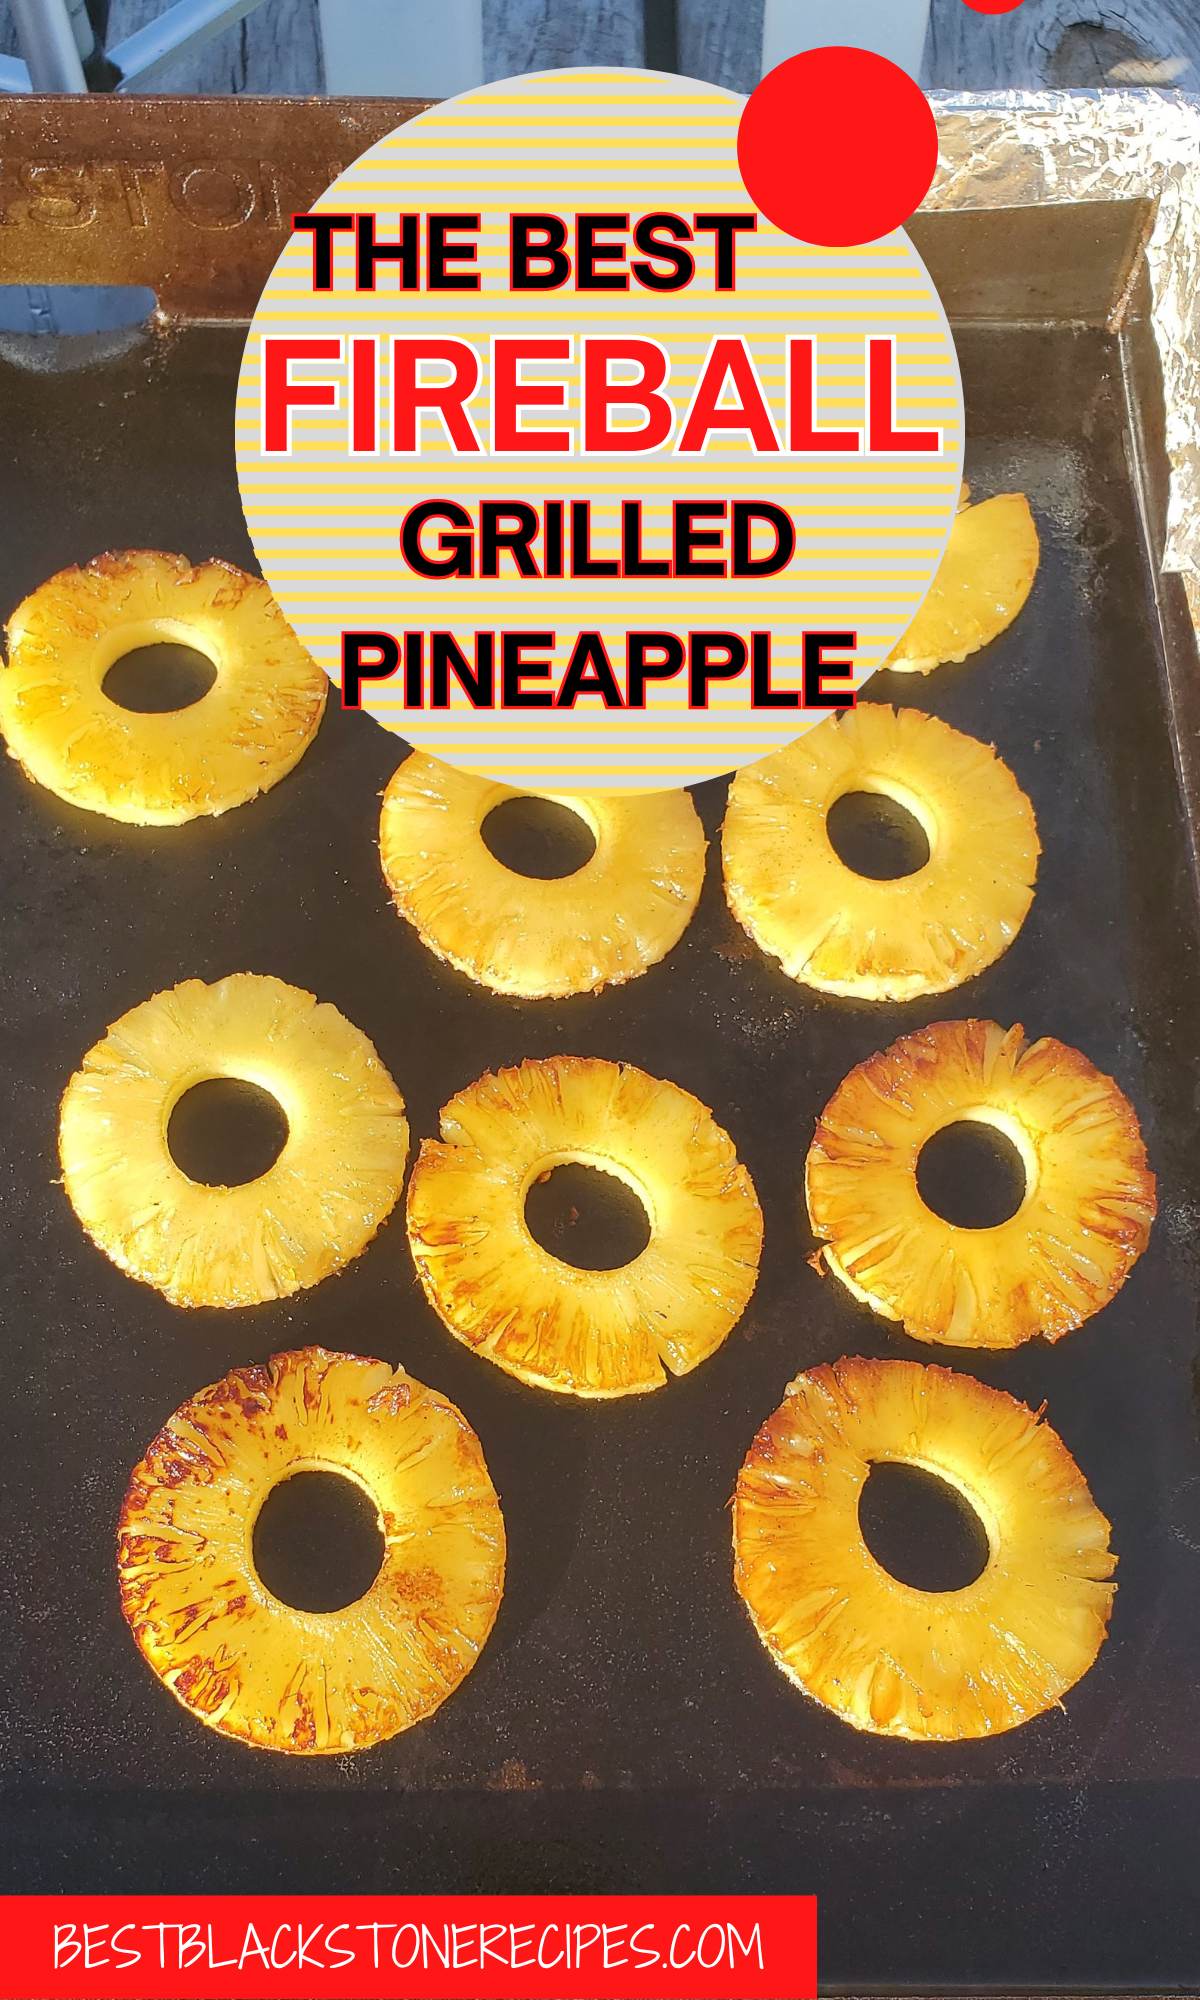 How To Make Fireball Grilled Pineapple